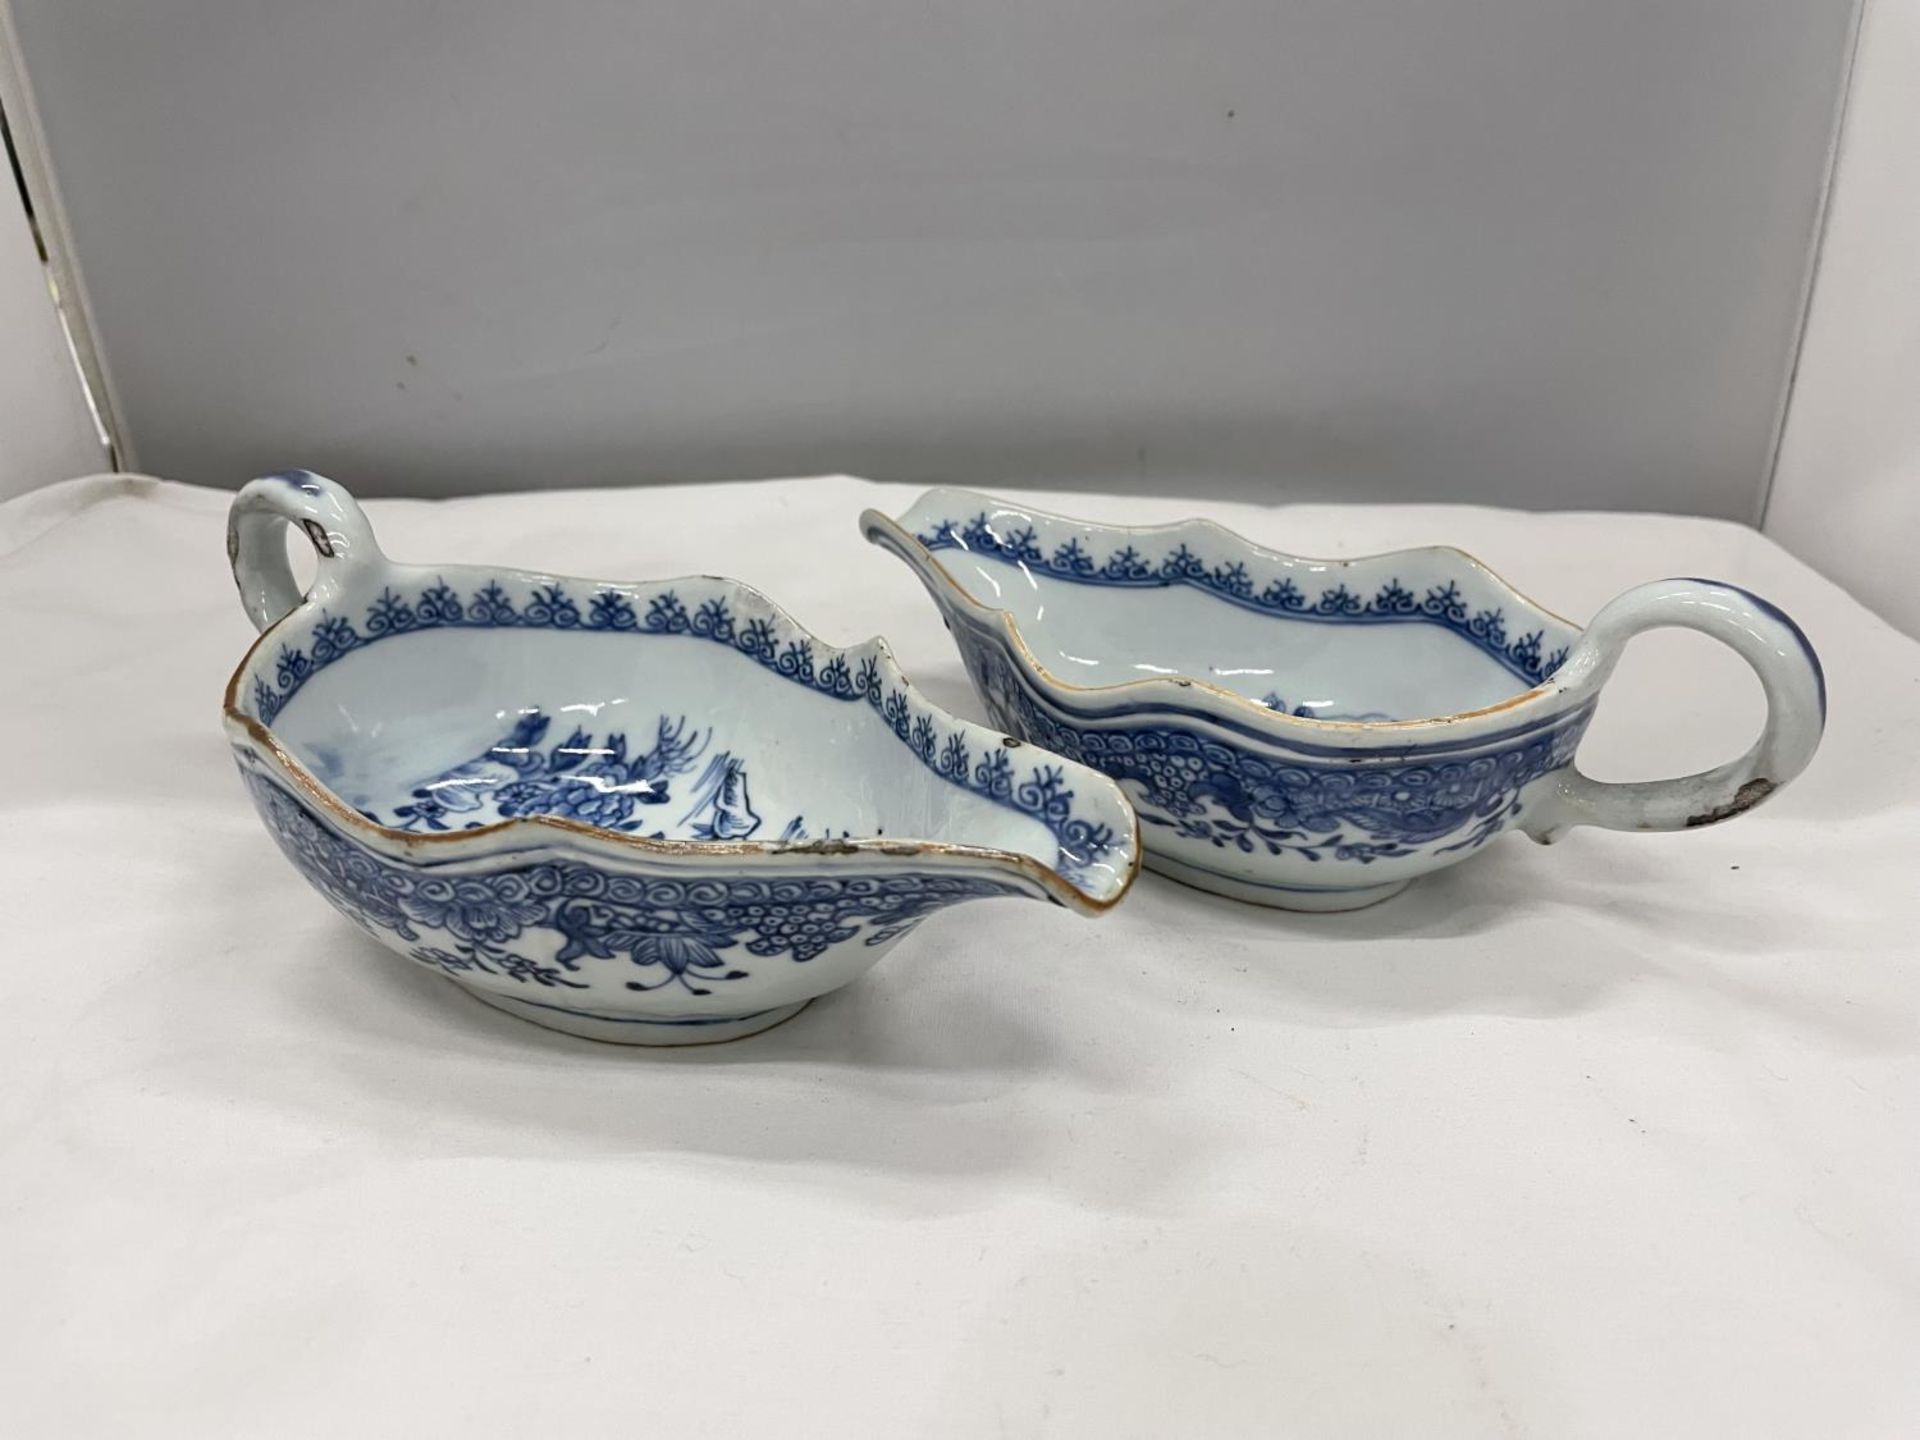 A BELIEVED TO BE LATE 18TH/EARLY 19TH CENTURY CHINESE QING DYNASTY/NANKIN BLUE AND WHITE SAUCE